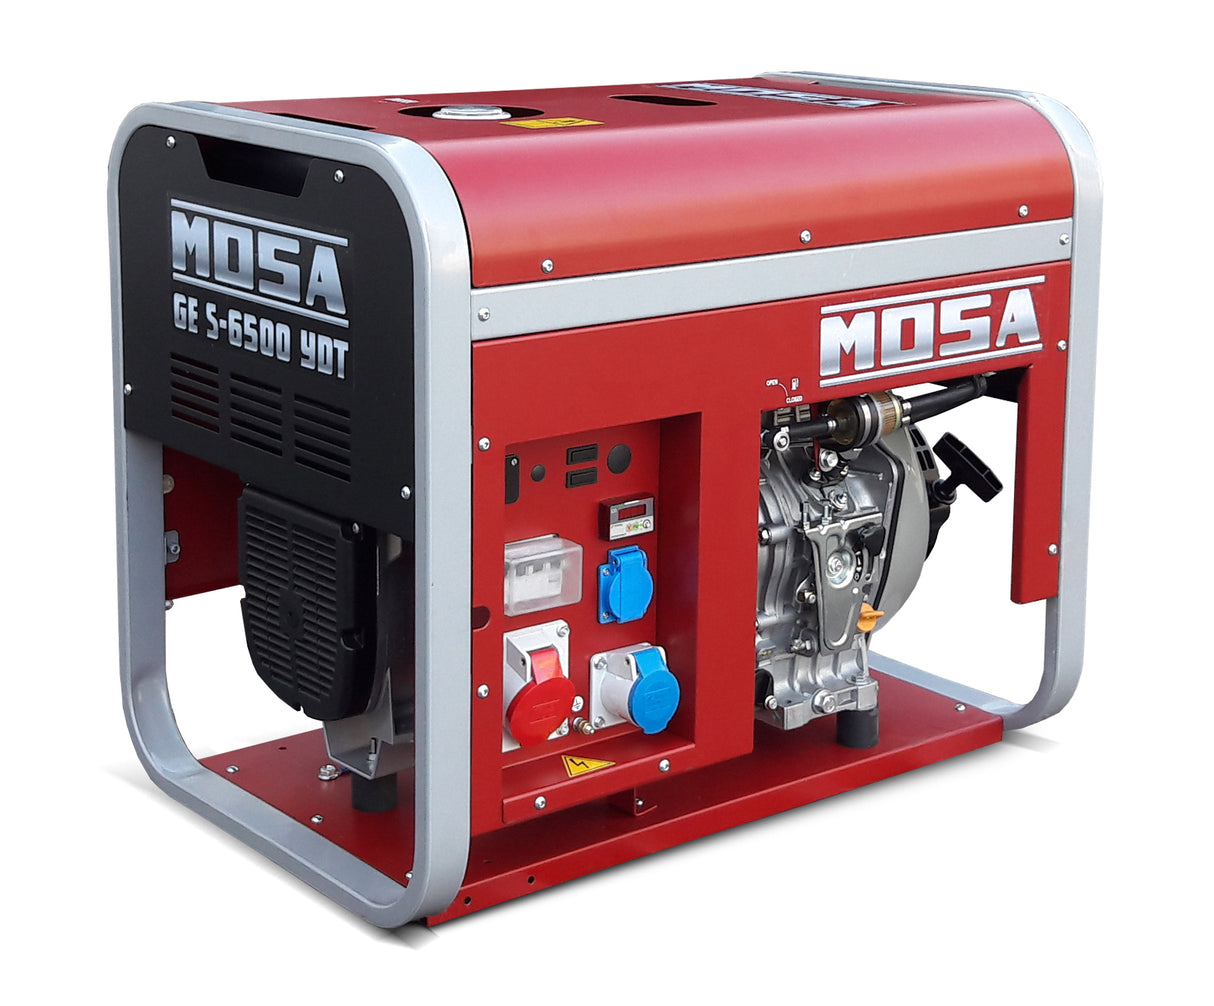 Portable power generator MOSA GES 6500 YDTE